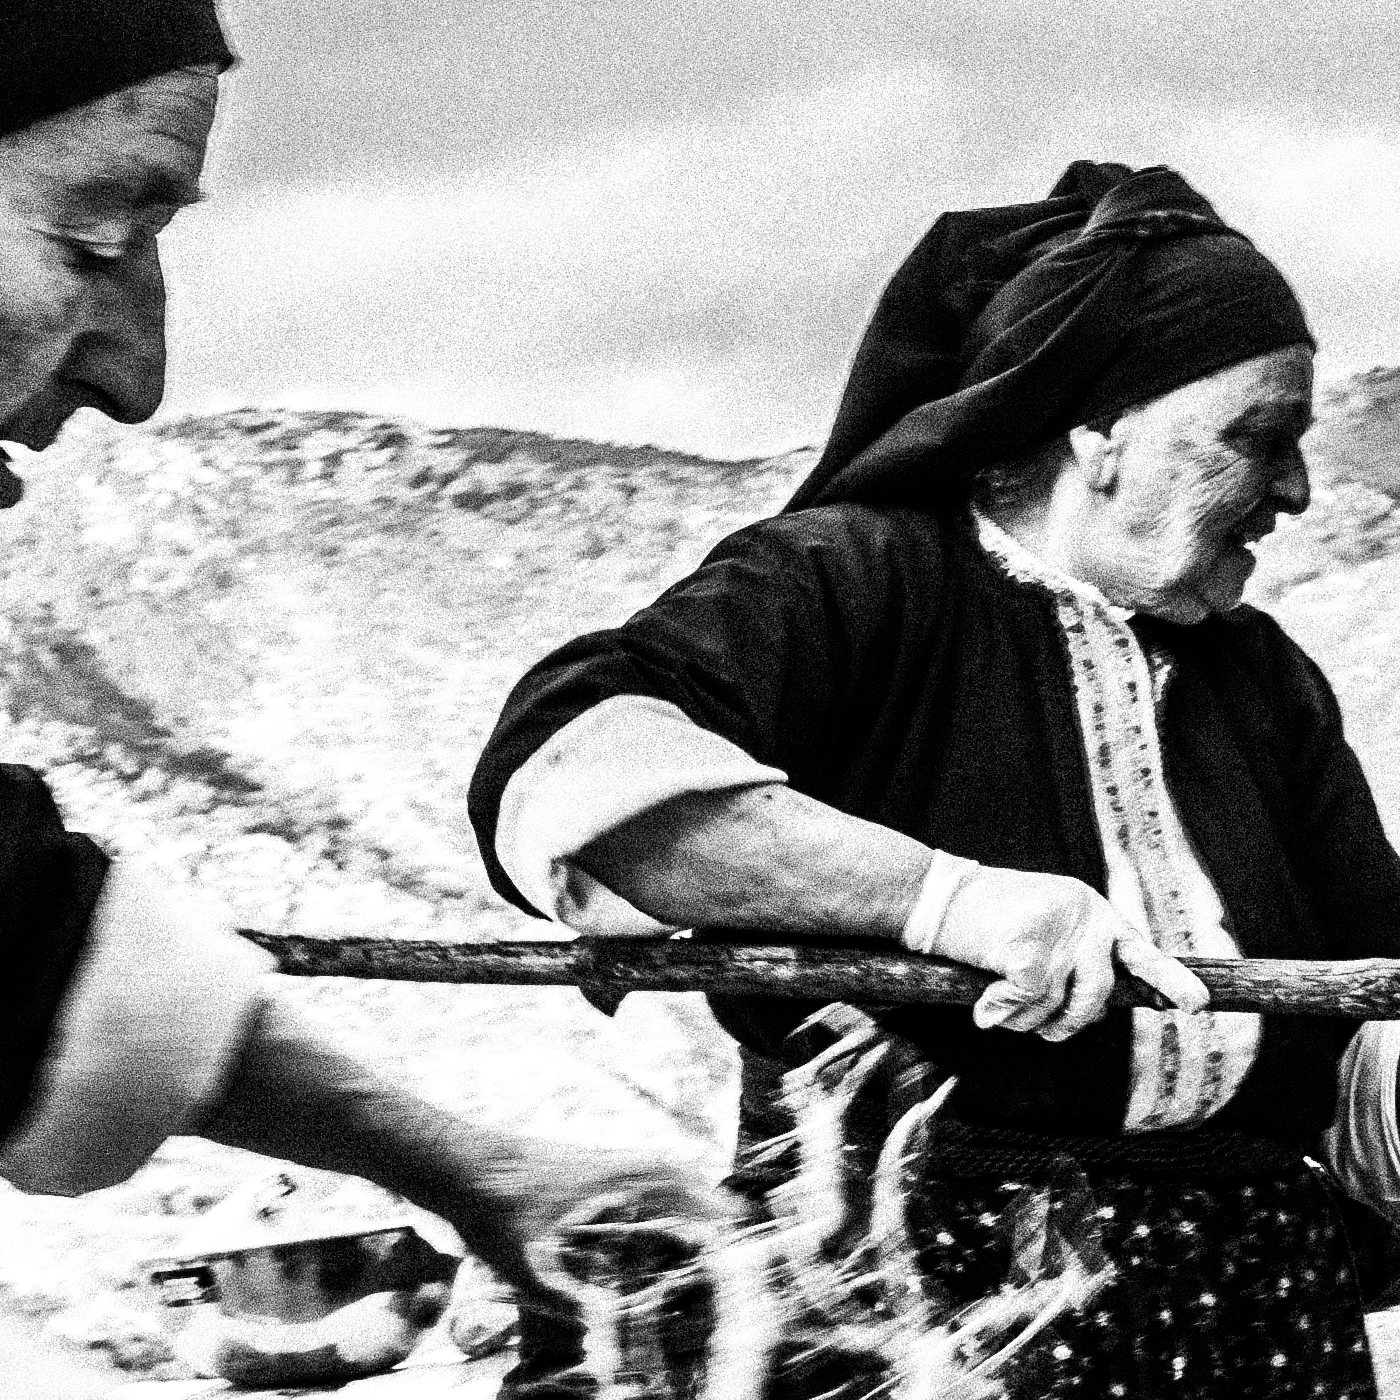 Black and White Photography Wall Art Greece | Women lighting up the wood oven Olympos Karpathos Dodecanese by George Tatakis - detailed view